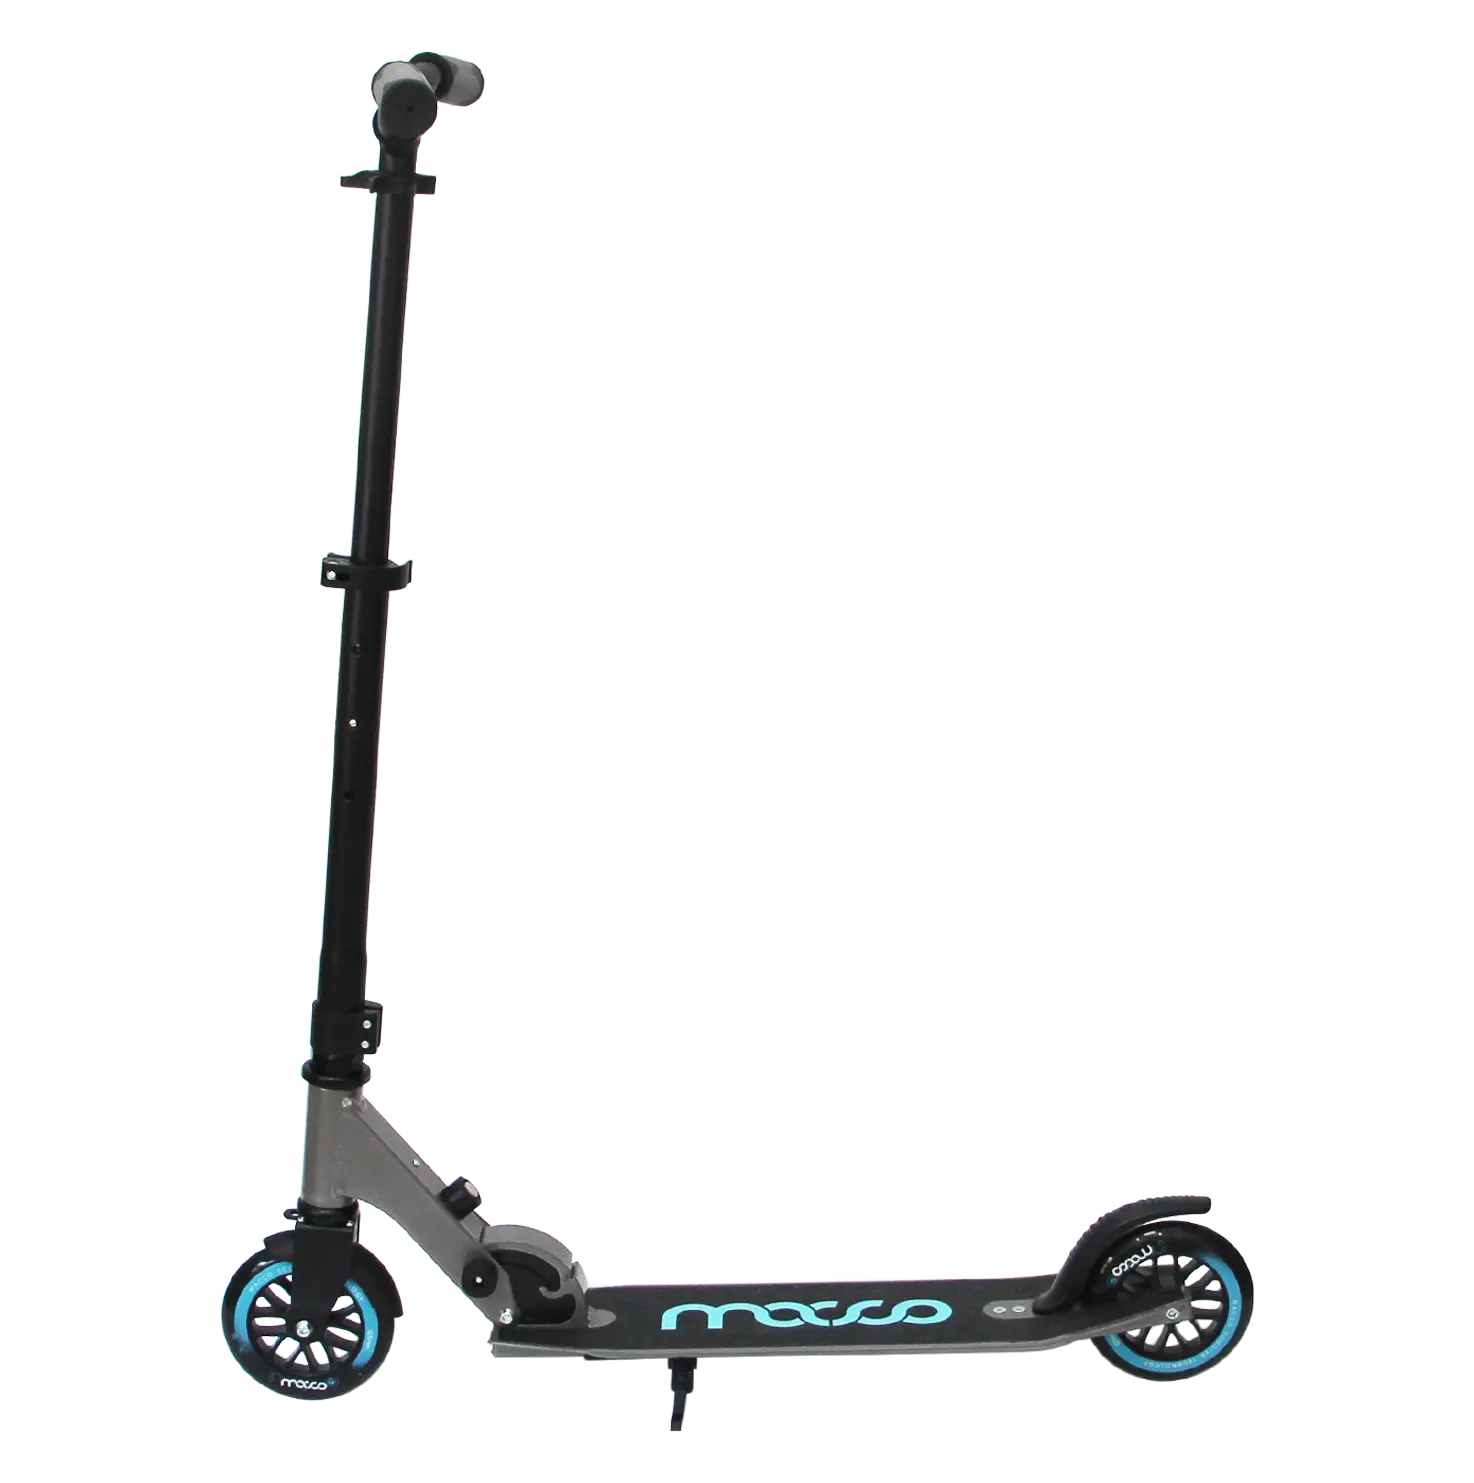 Pony youth scooter 3